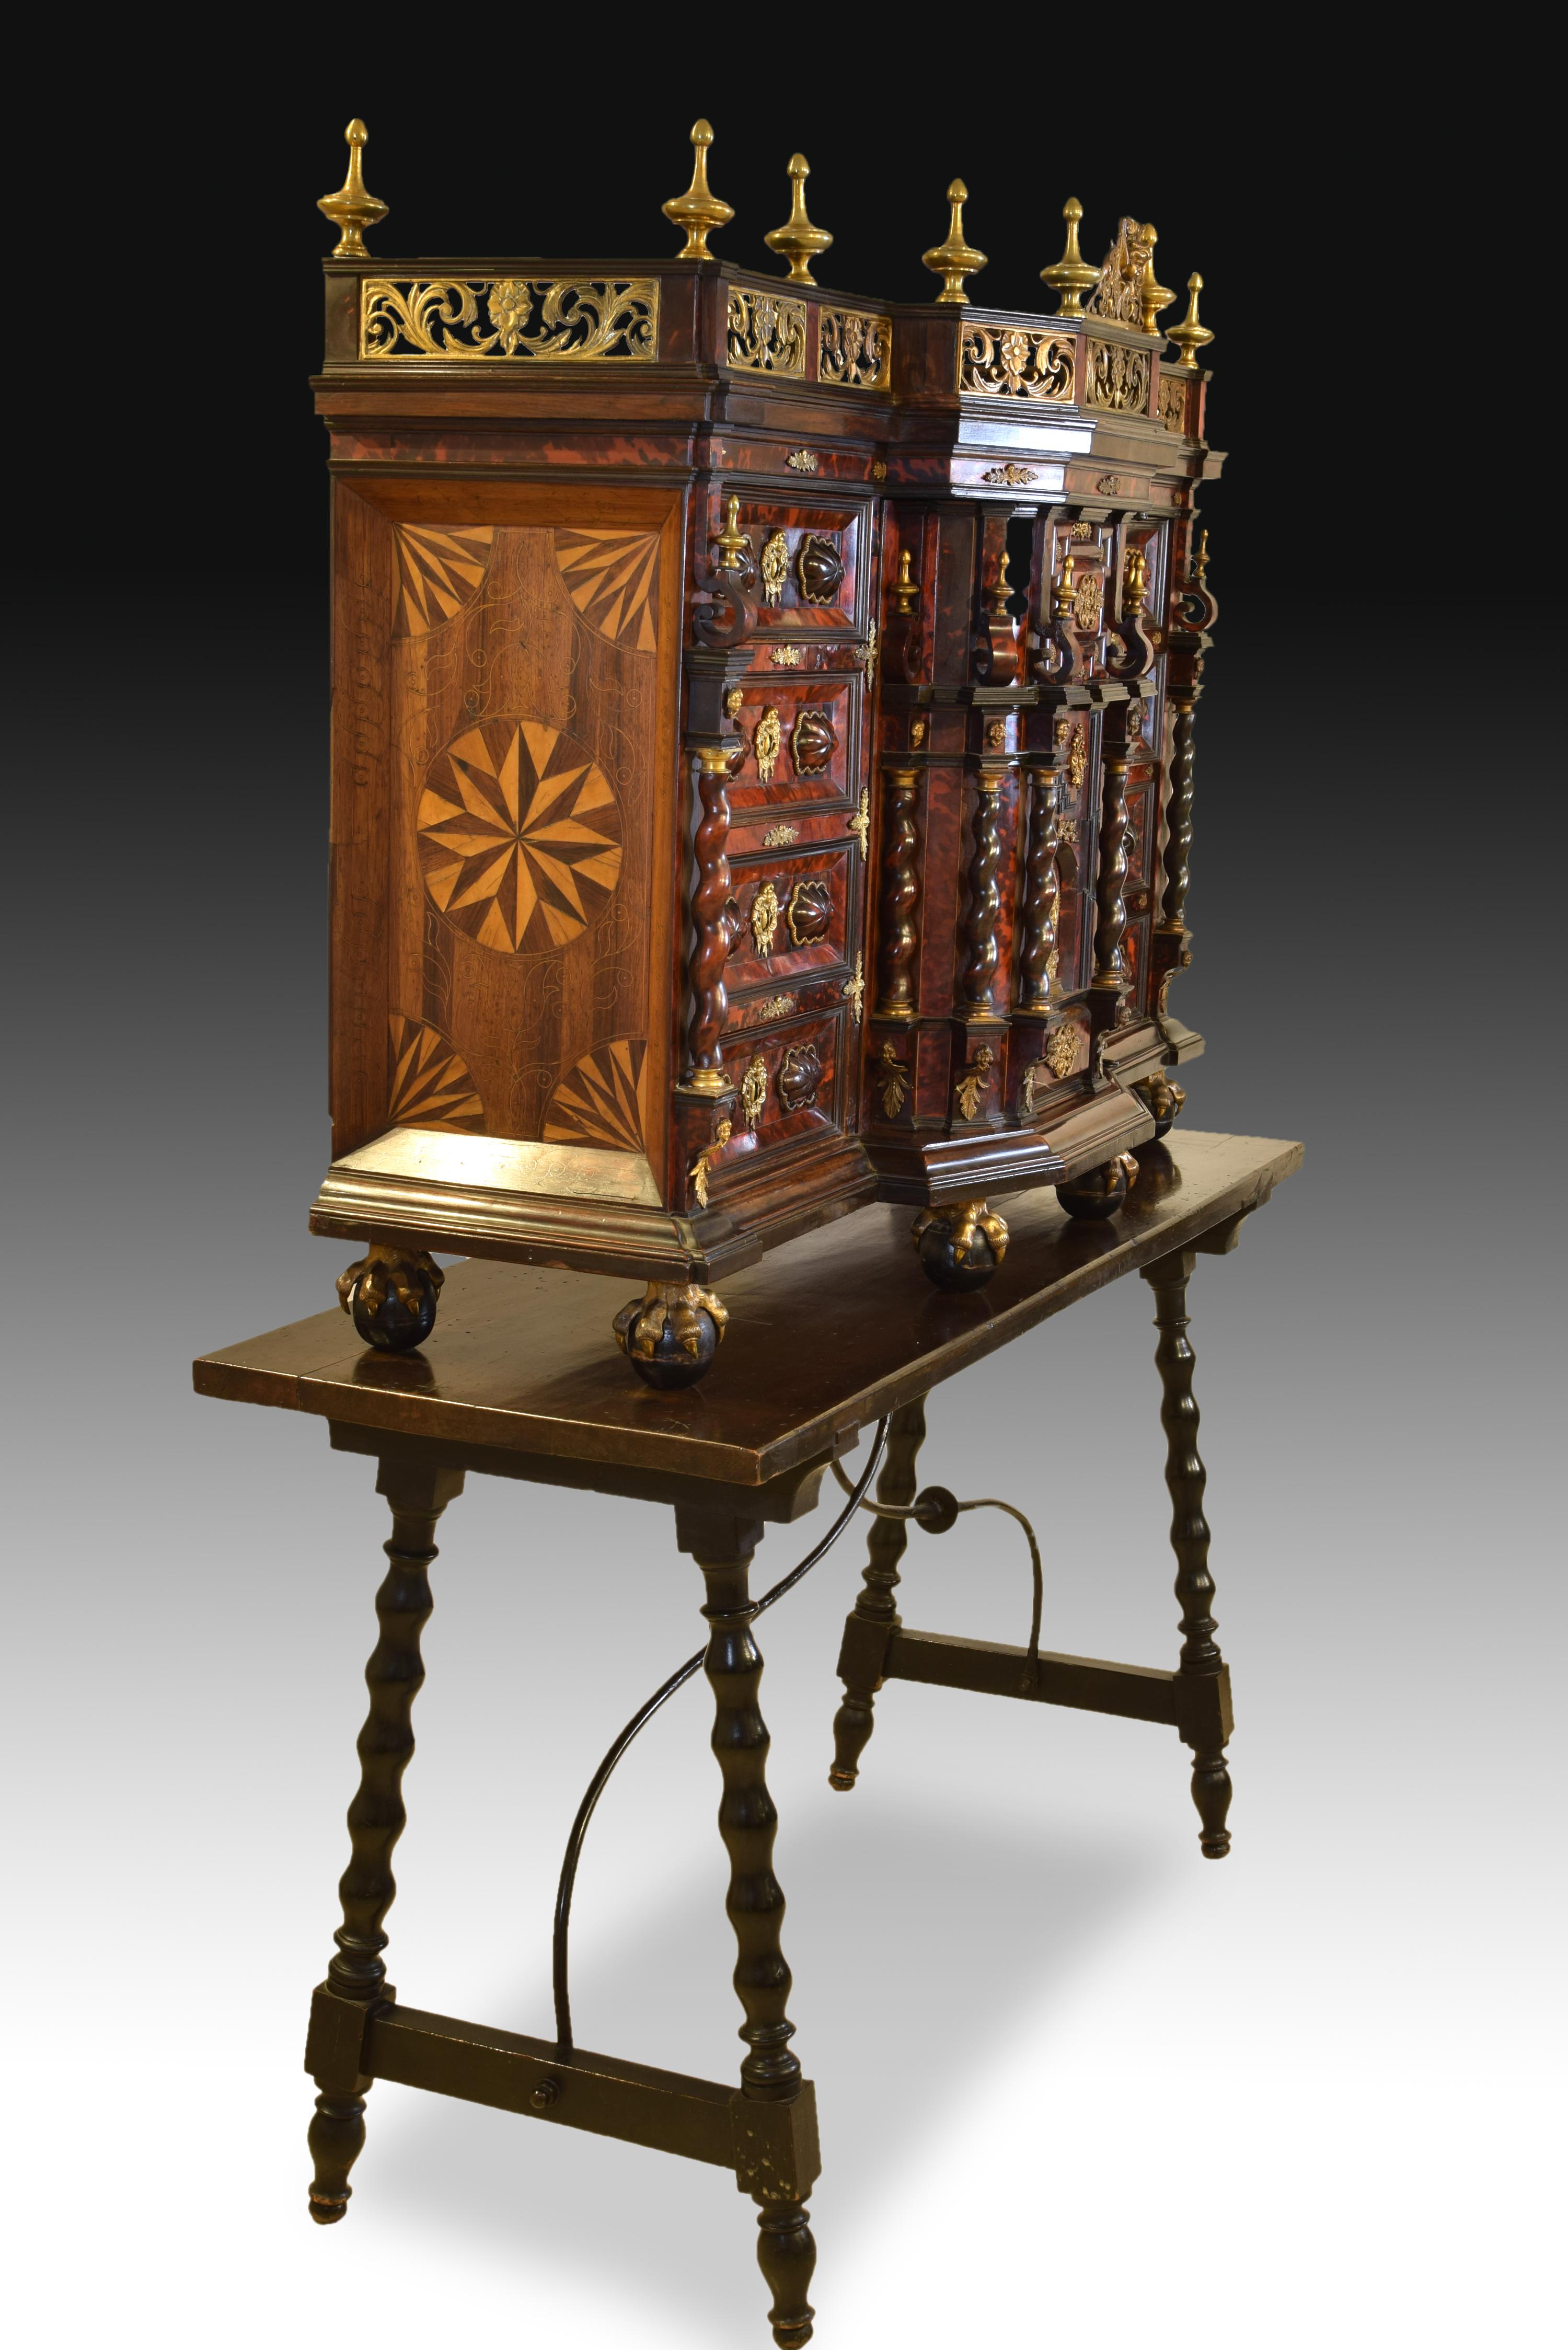 Bargueño. Tortoise, bronze, wood, iron. Italy, 17th century; rear table.
Uncovered sample desk made of wood and finished in tortoiseshell that has a division into three areas at the front. The sides have four drawers each (each with two veined